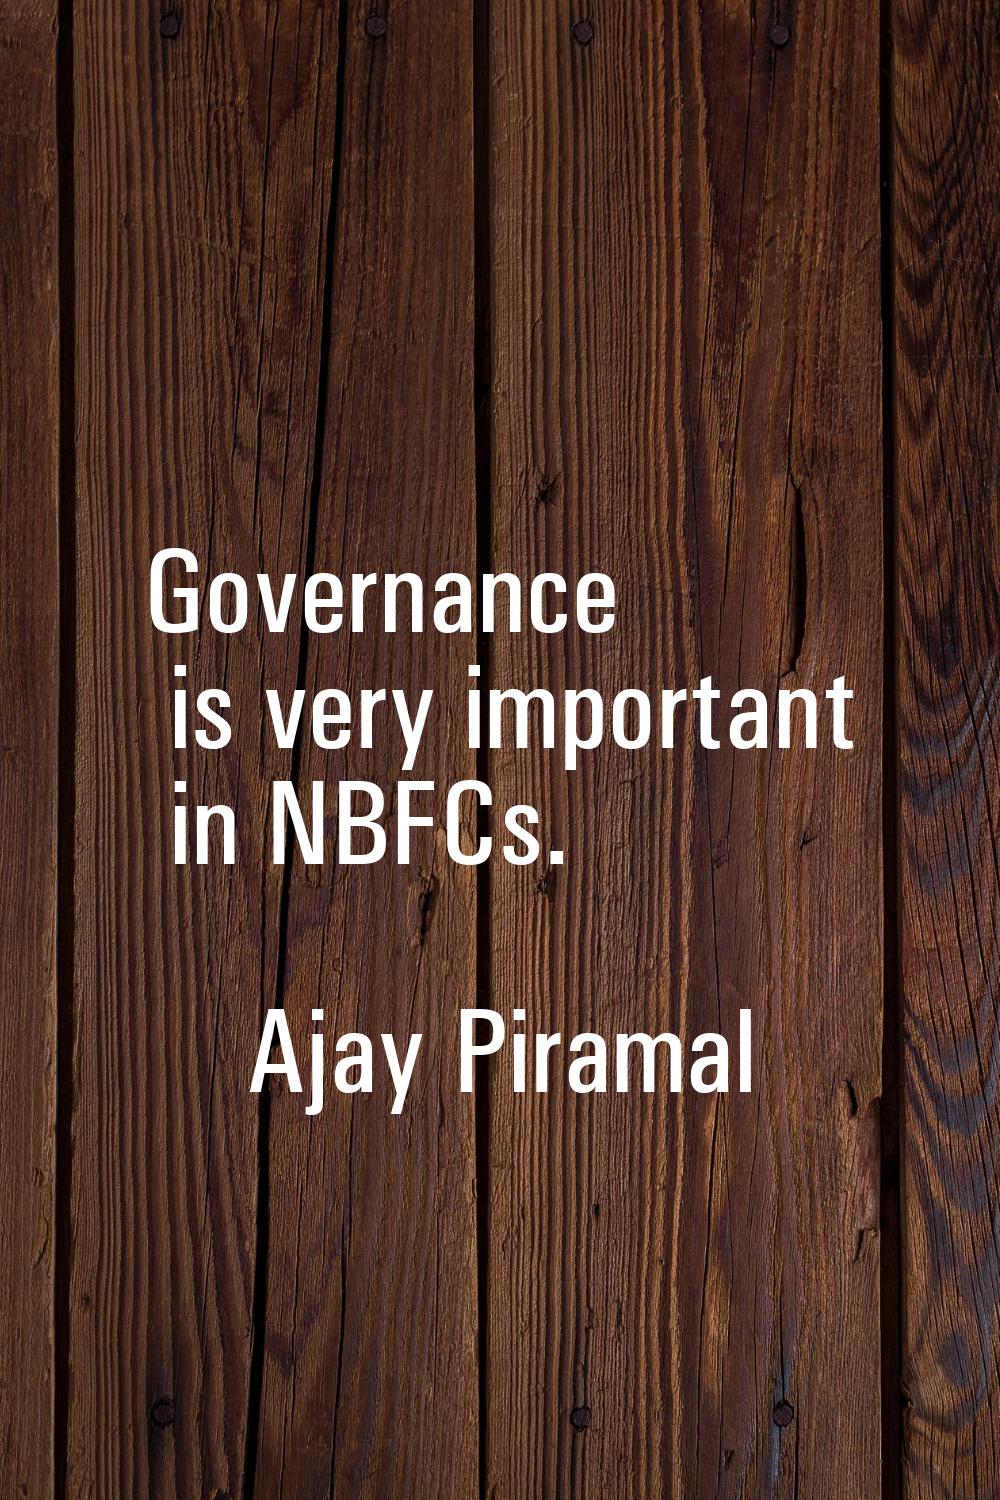 Governance is very important in NBFCs.